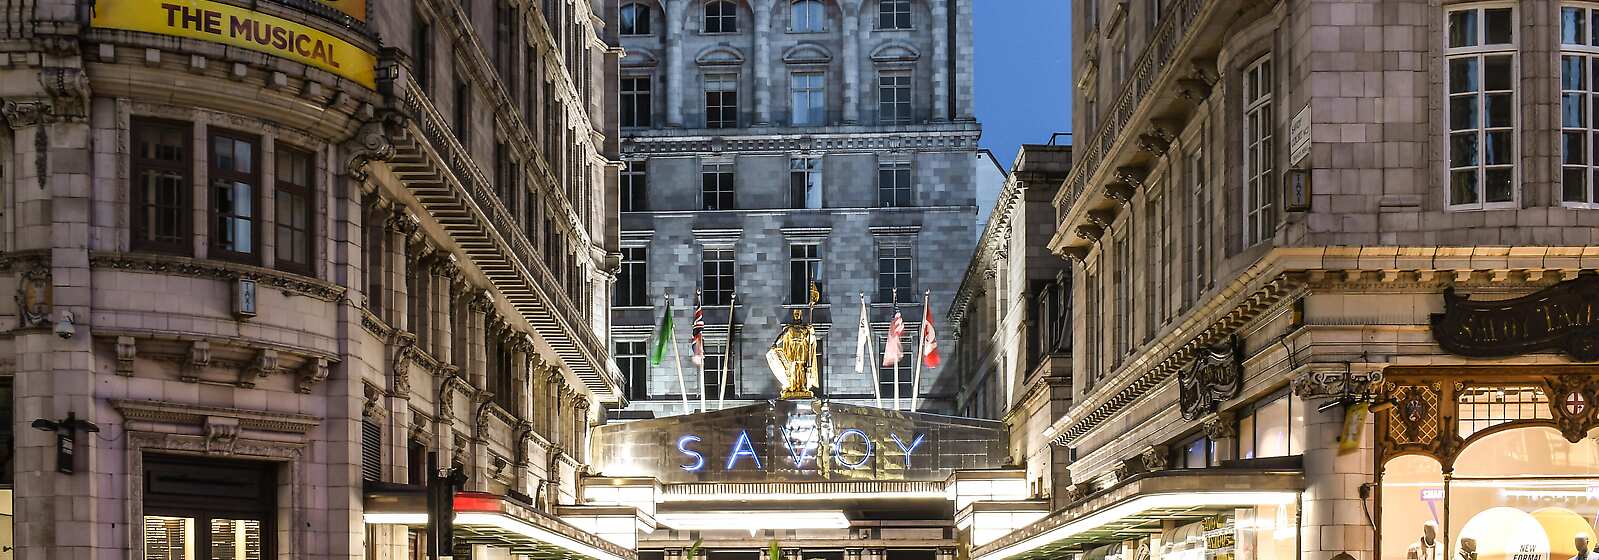 The Savoy entrance at night with flags